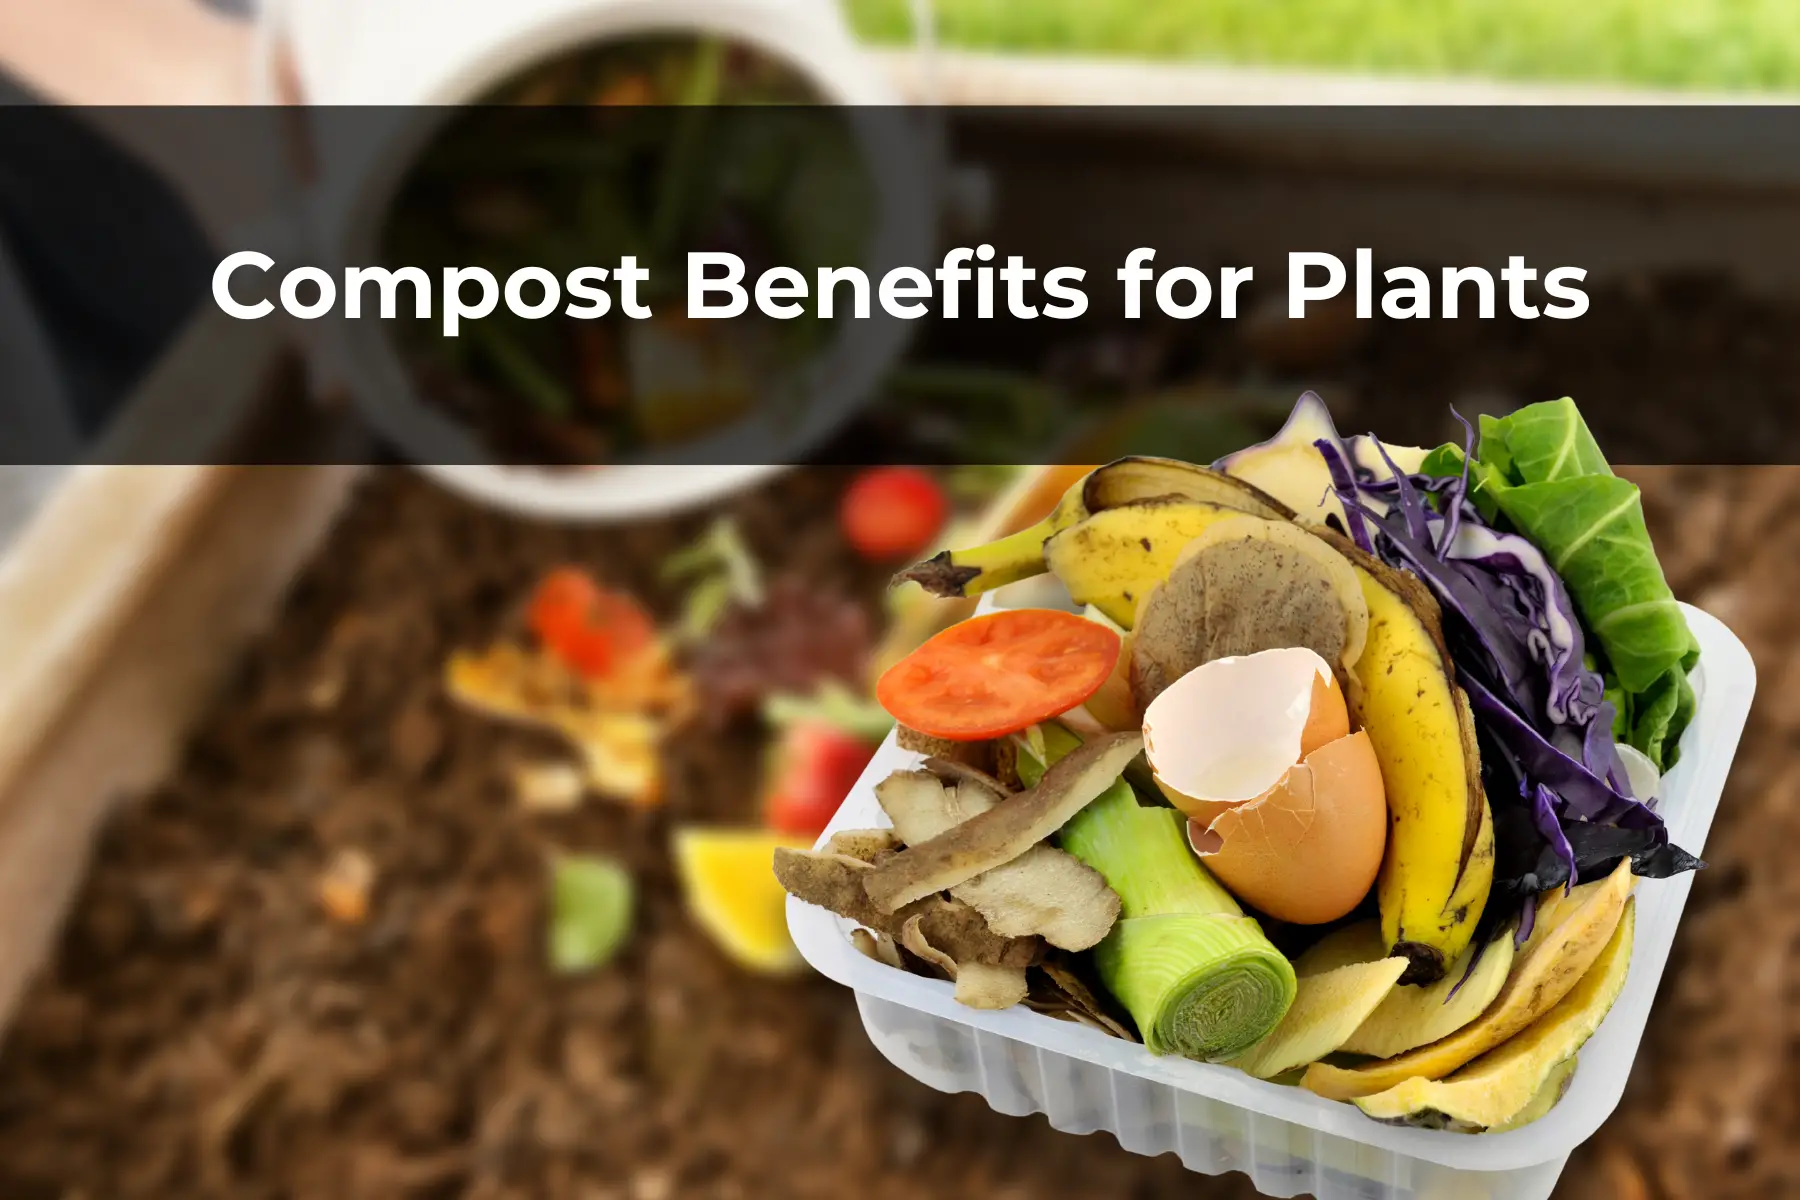 Compost Benefits for Plants